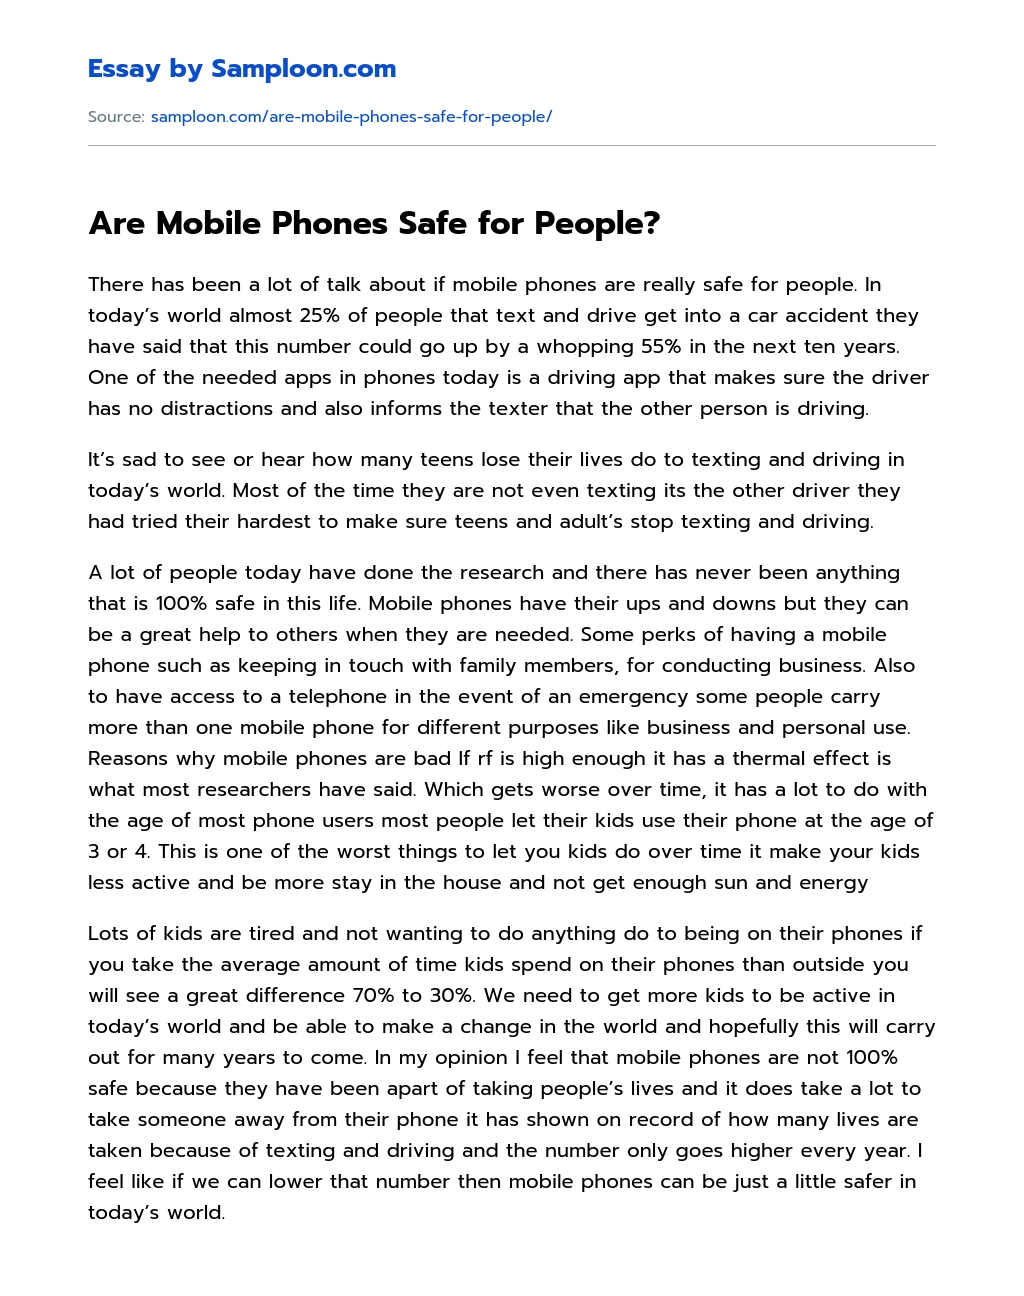 Are Mobile Phones Safe for People? essay